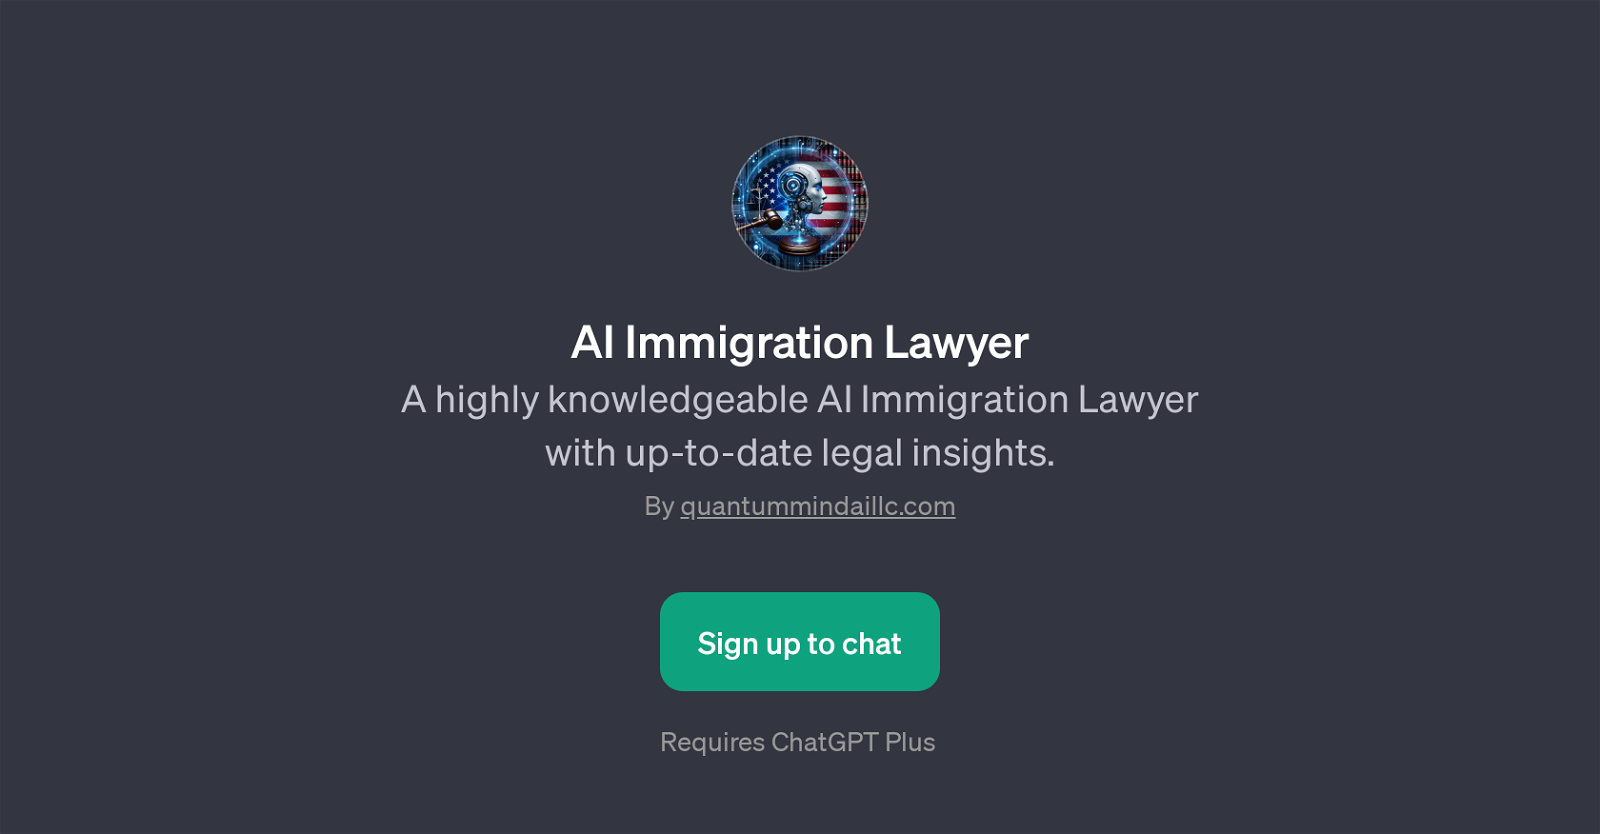 AI Immigration Lawyer website